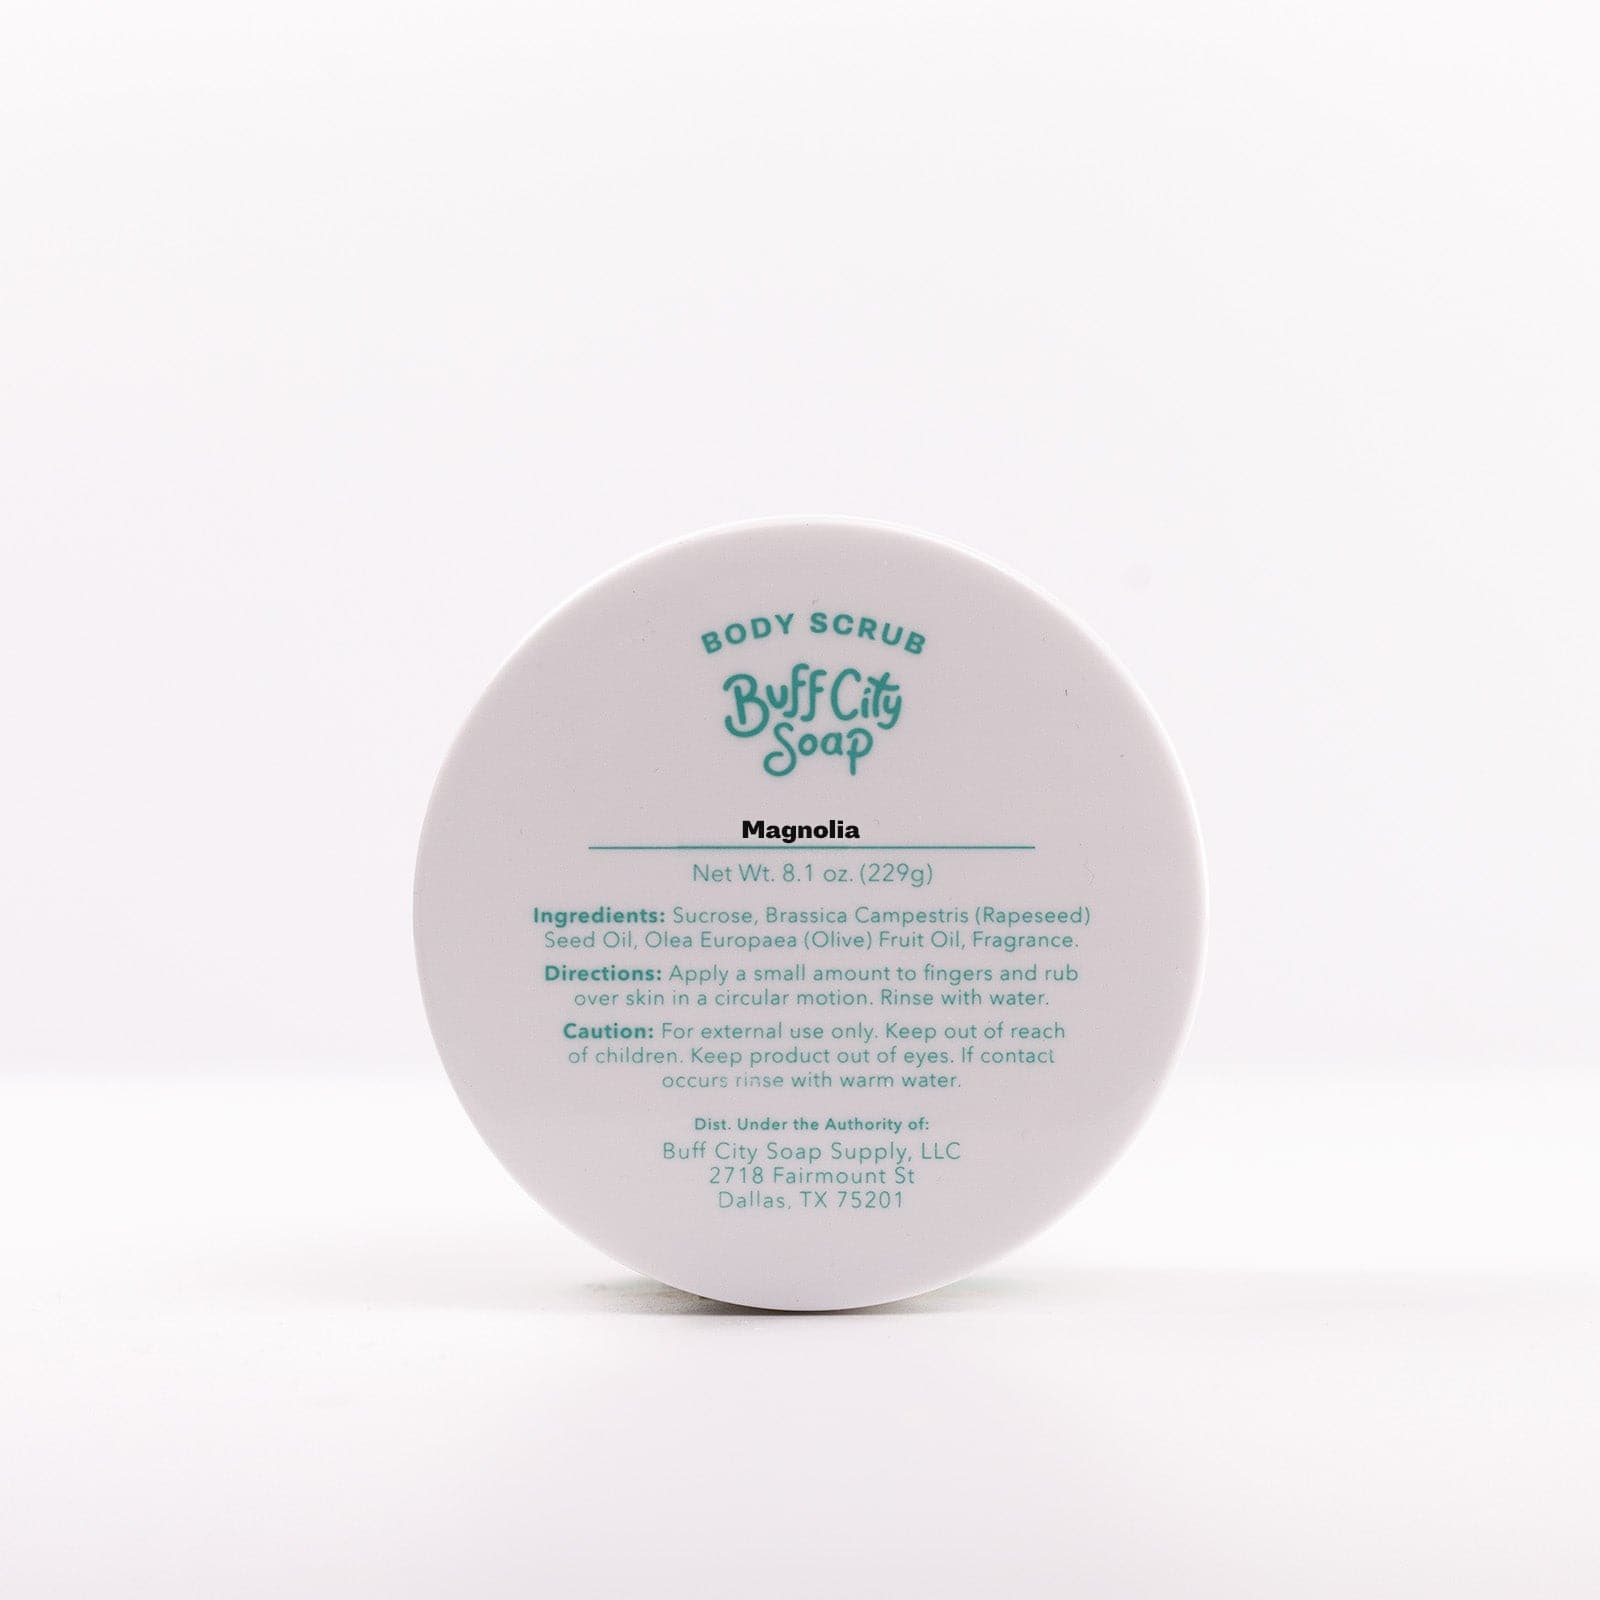 lid of Buff City Soap's magnolia scented body scrub listing the directions, ingredients and cautions